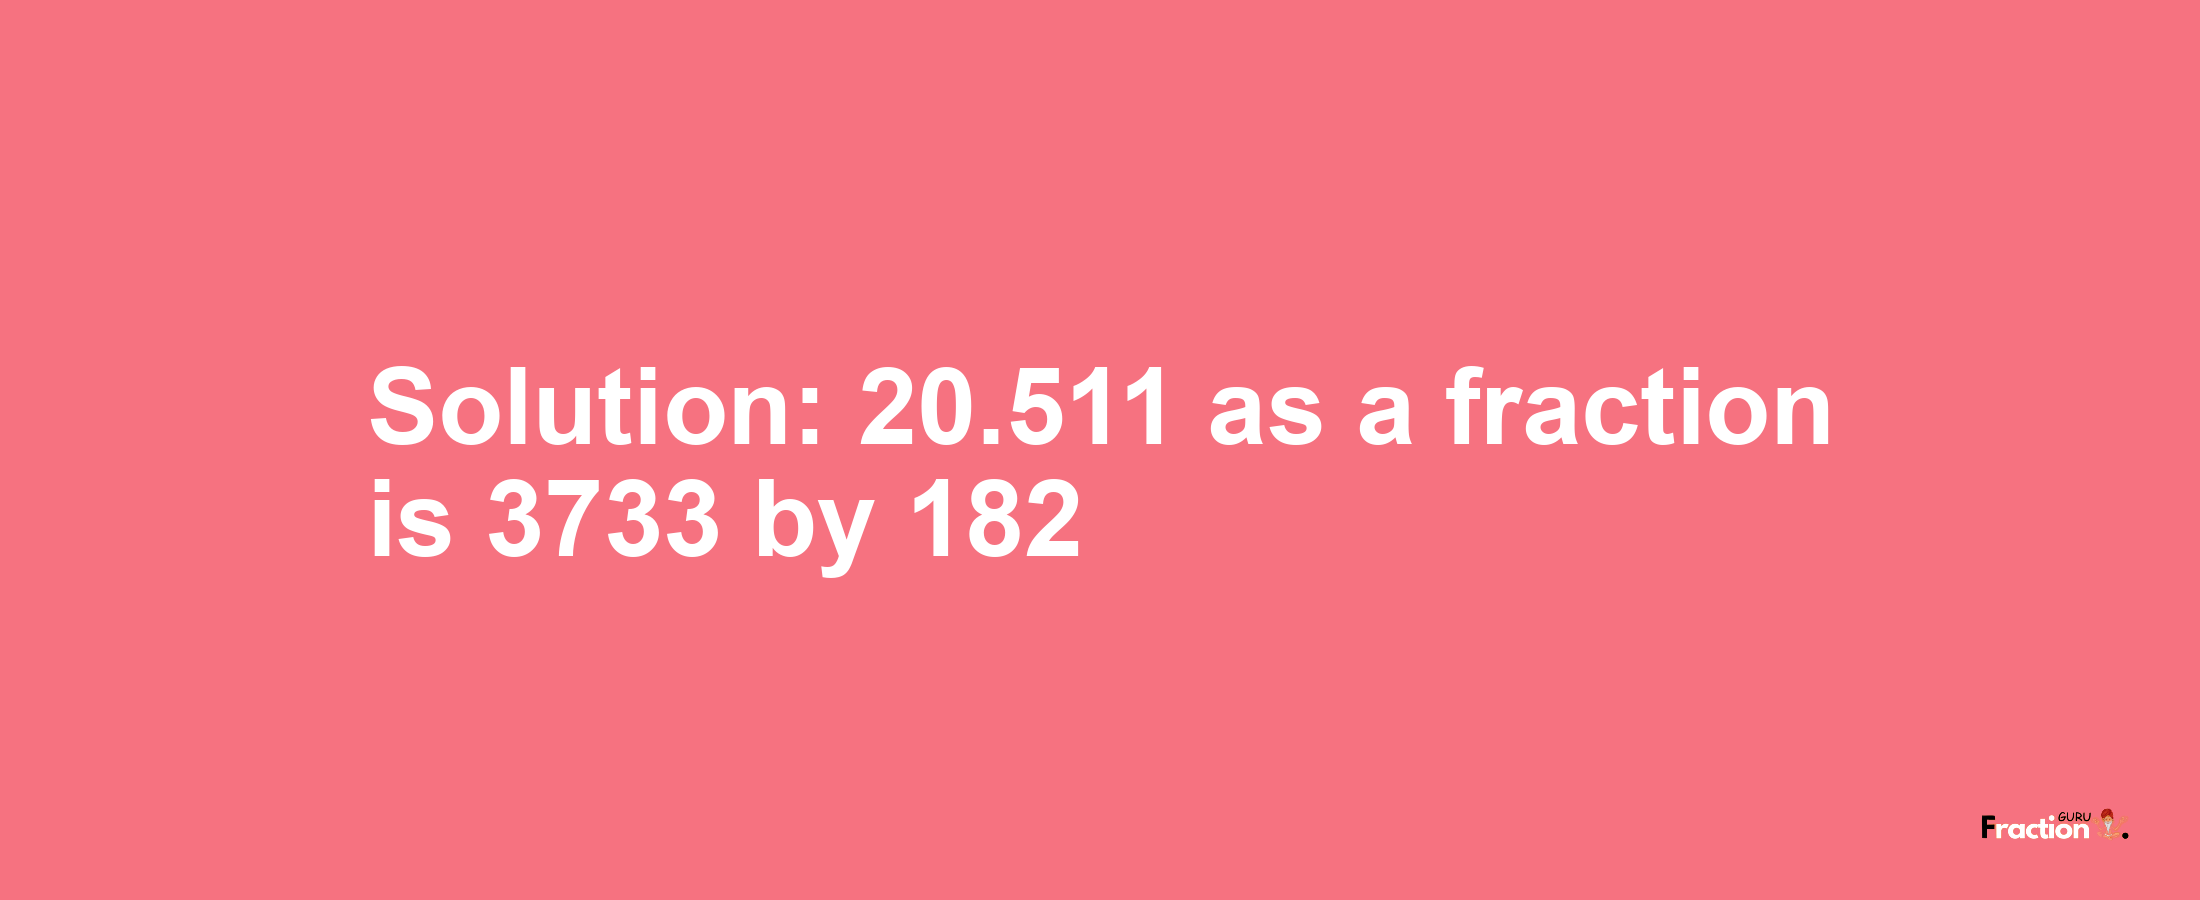 Solution:20.511 as a fraction is 3733/182